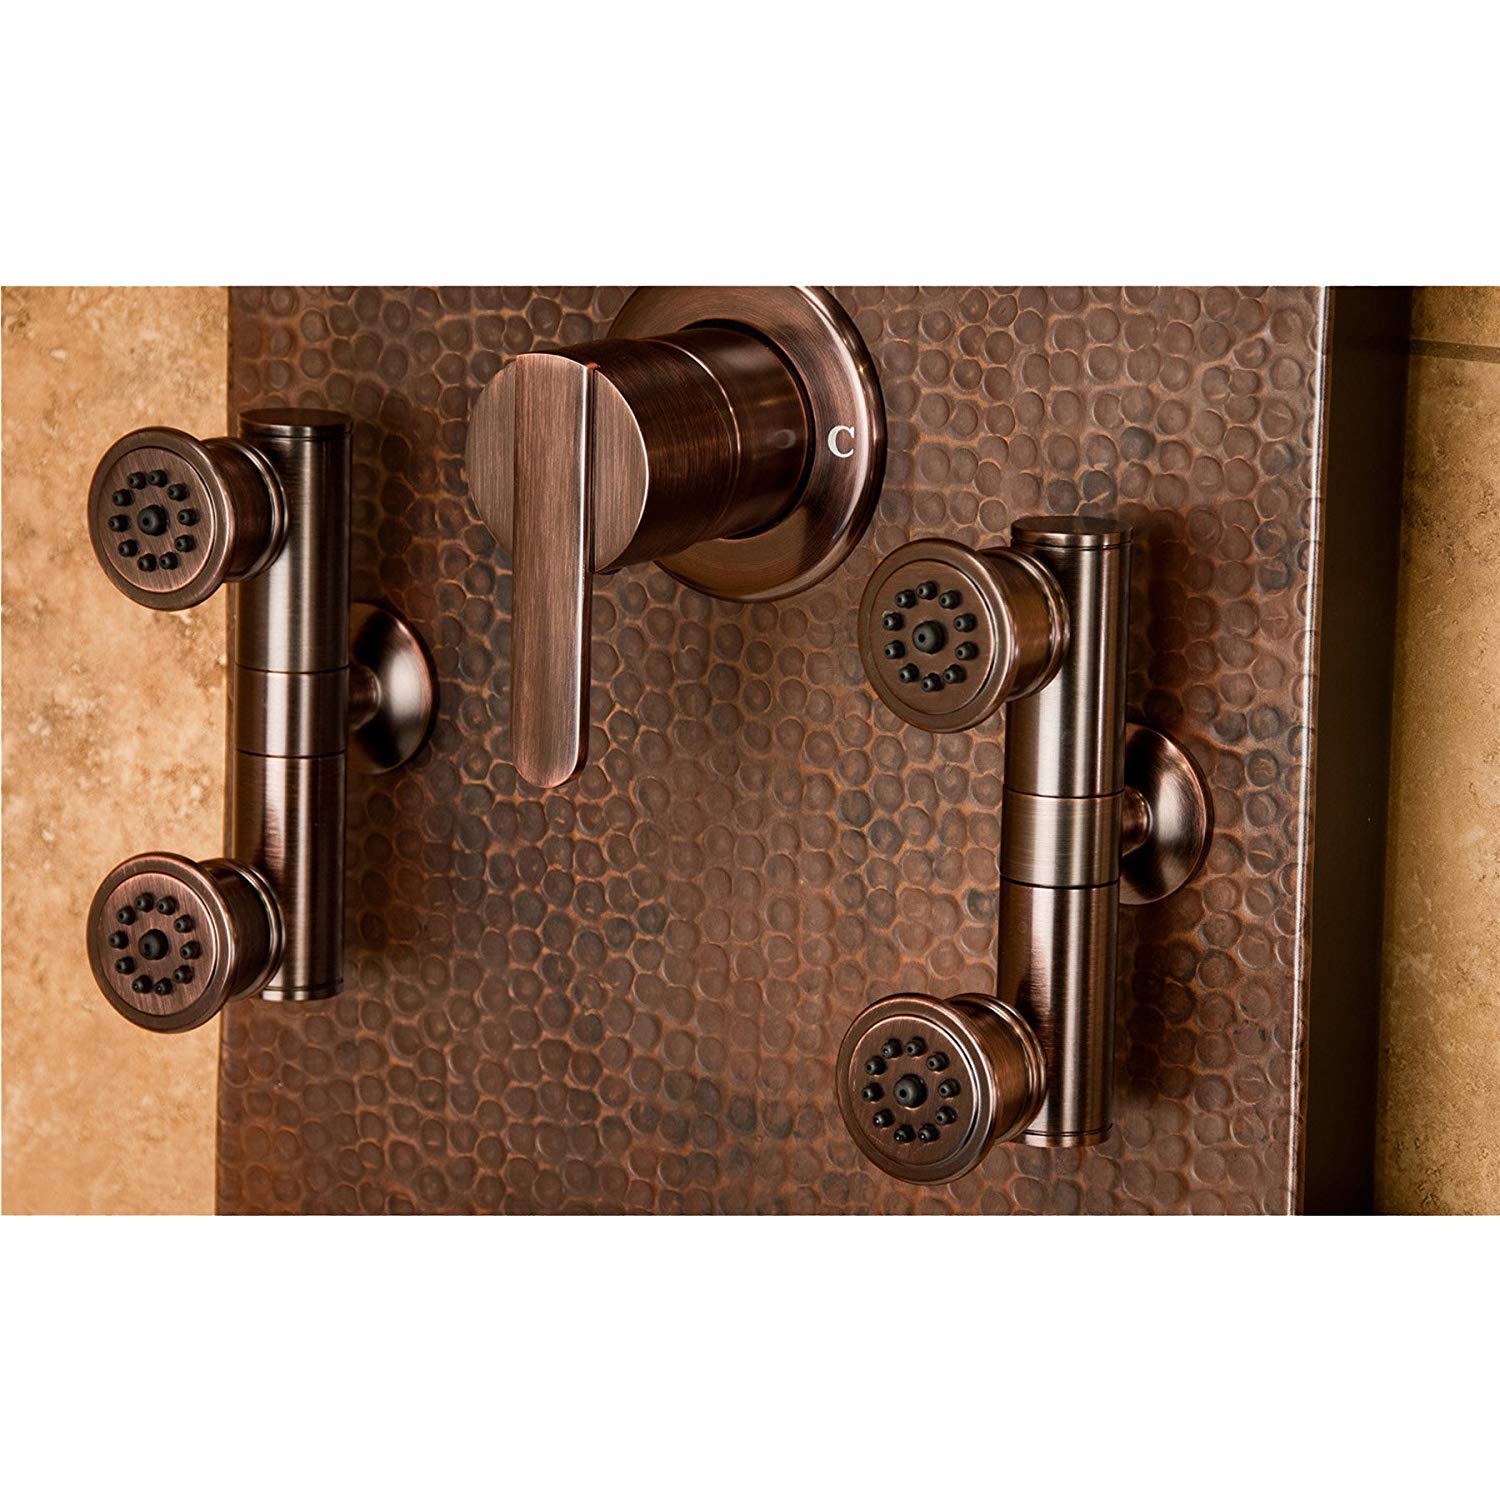 PULSE ShowerSpas 1016 Mojave ShowerSpa Panel with 8" Rain Showerhead, 8 Body Spray Jets, 5-Function Hand Shower, Glass Shelf and Tub Spout, Hand Hammered Copper with Oil Rubbed Bronze Finish